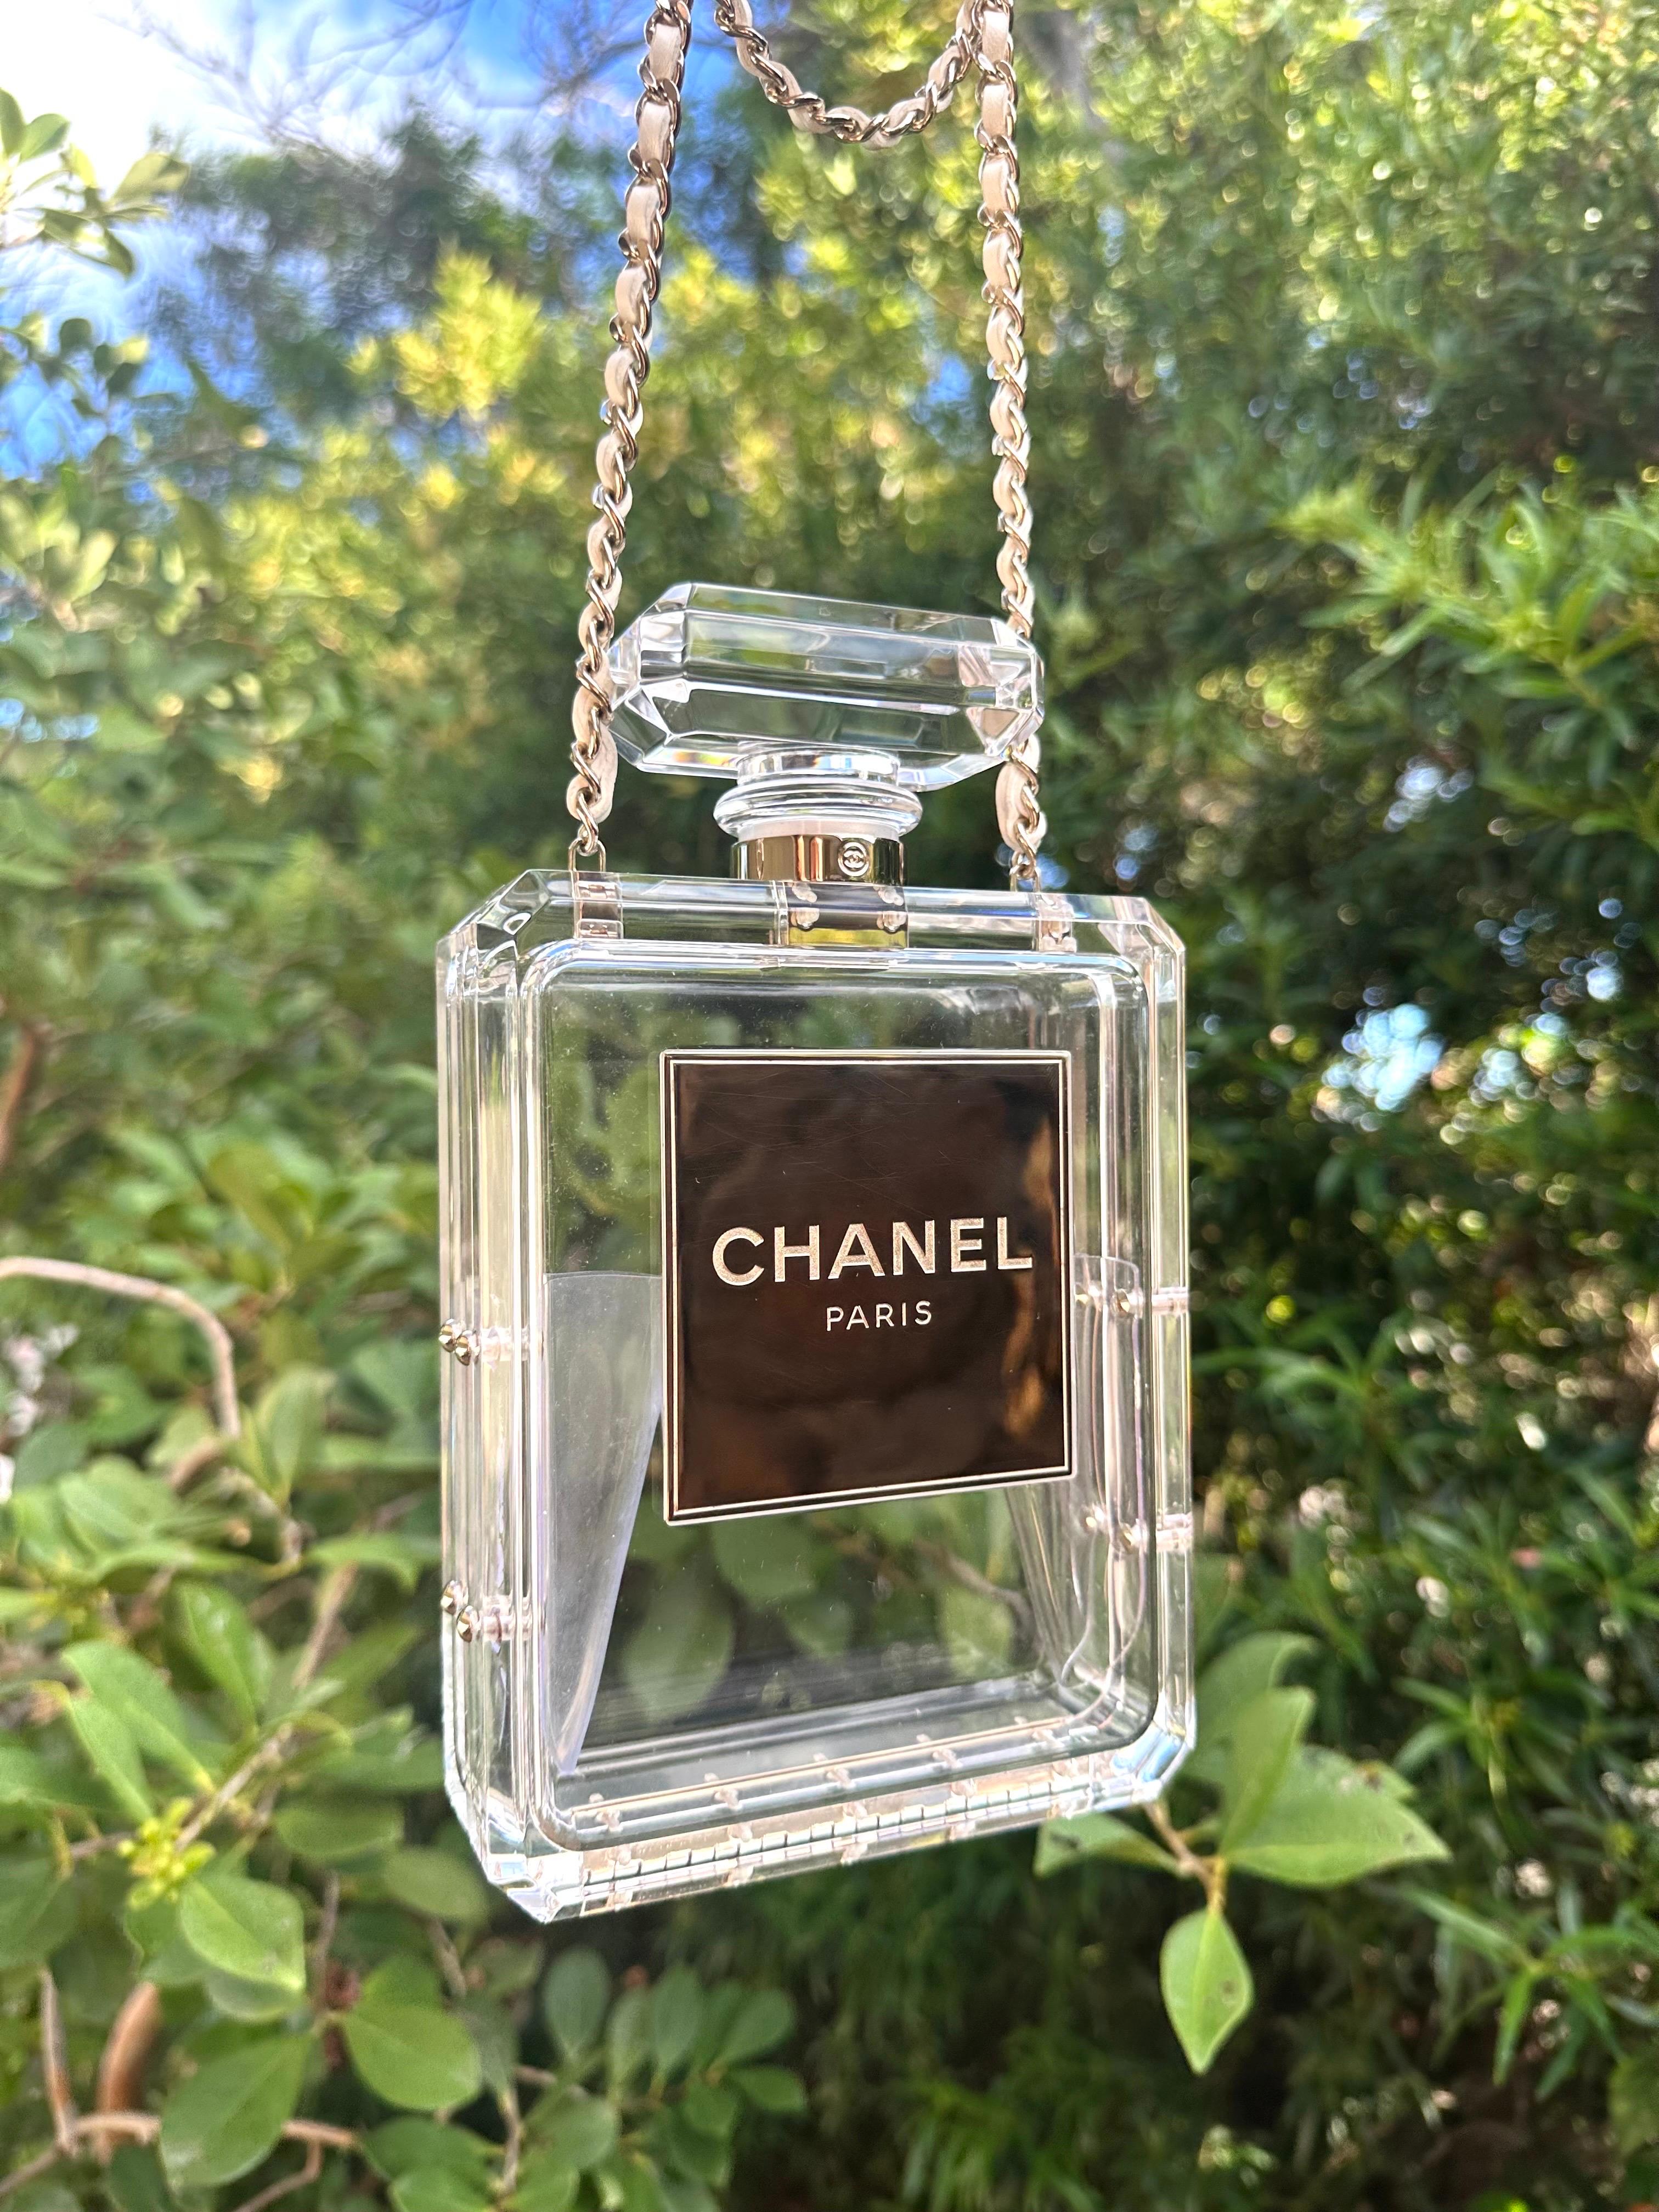 Chanel 2014 Cruise Clear Lucite N°5 Perfume Bottle Clutch - Limited Edition

Material: Plexiglass
Color: Clear
Condition: Very Good condition - some slight darkness on the trim of front plate / some discoloration on the backplate is present. Some